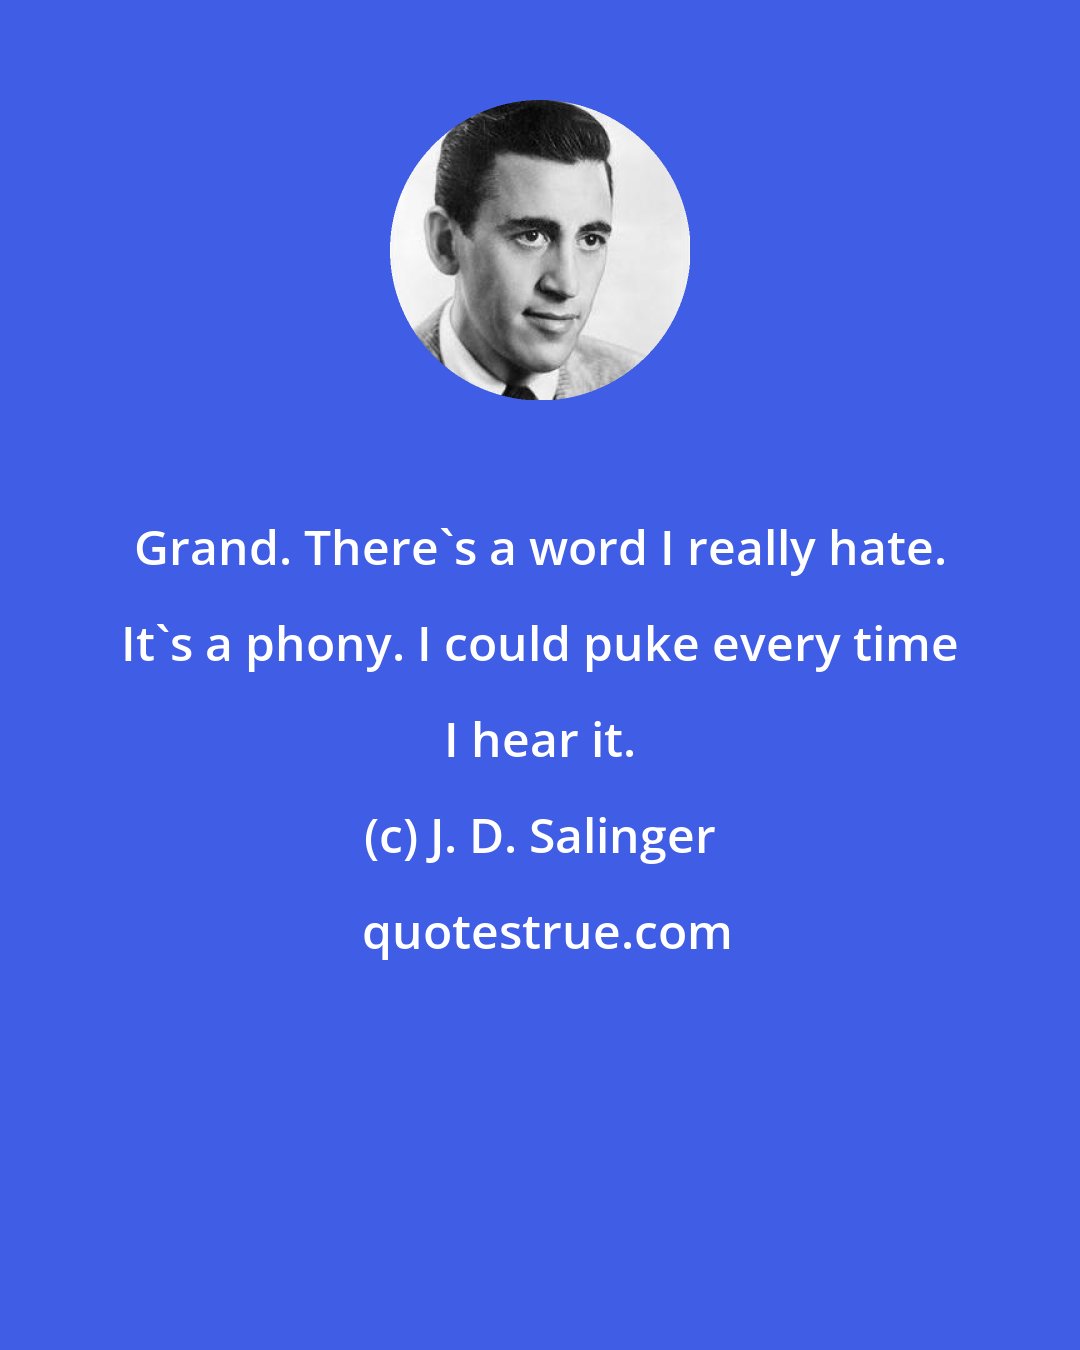 J. D. Salinger: Grand. There's a word I really hate. It's a phony. I could puke every time I hear it.